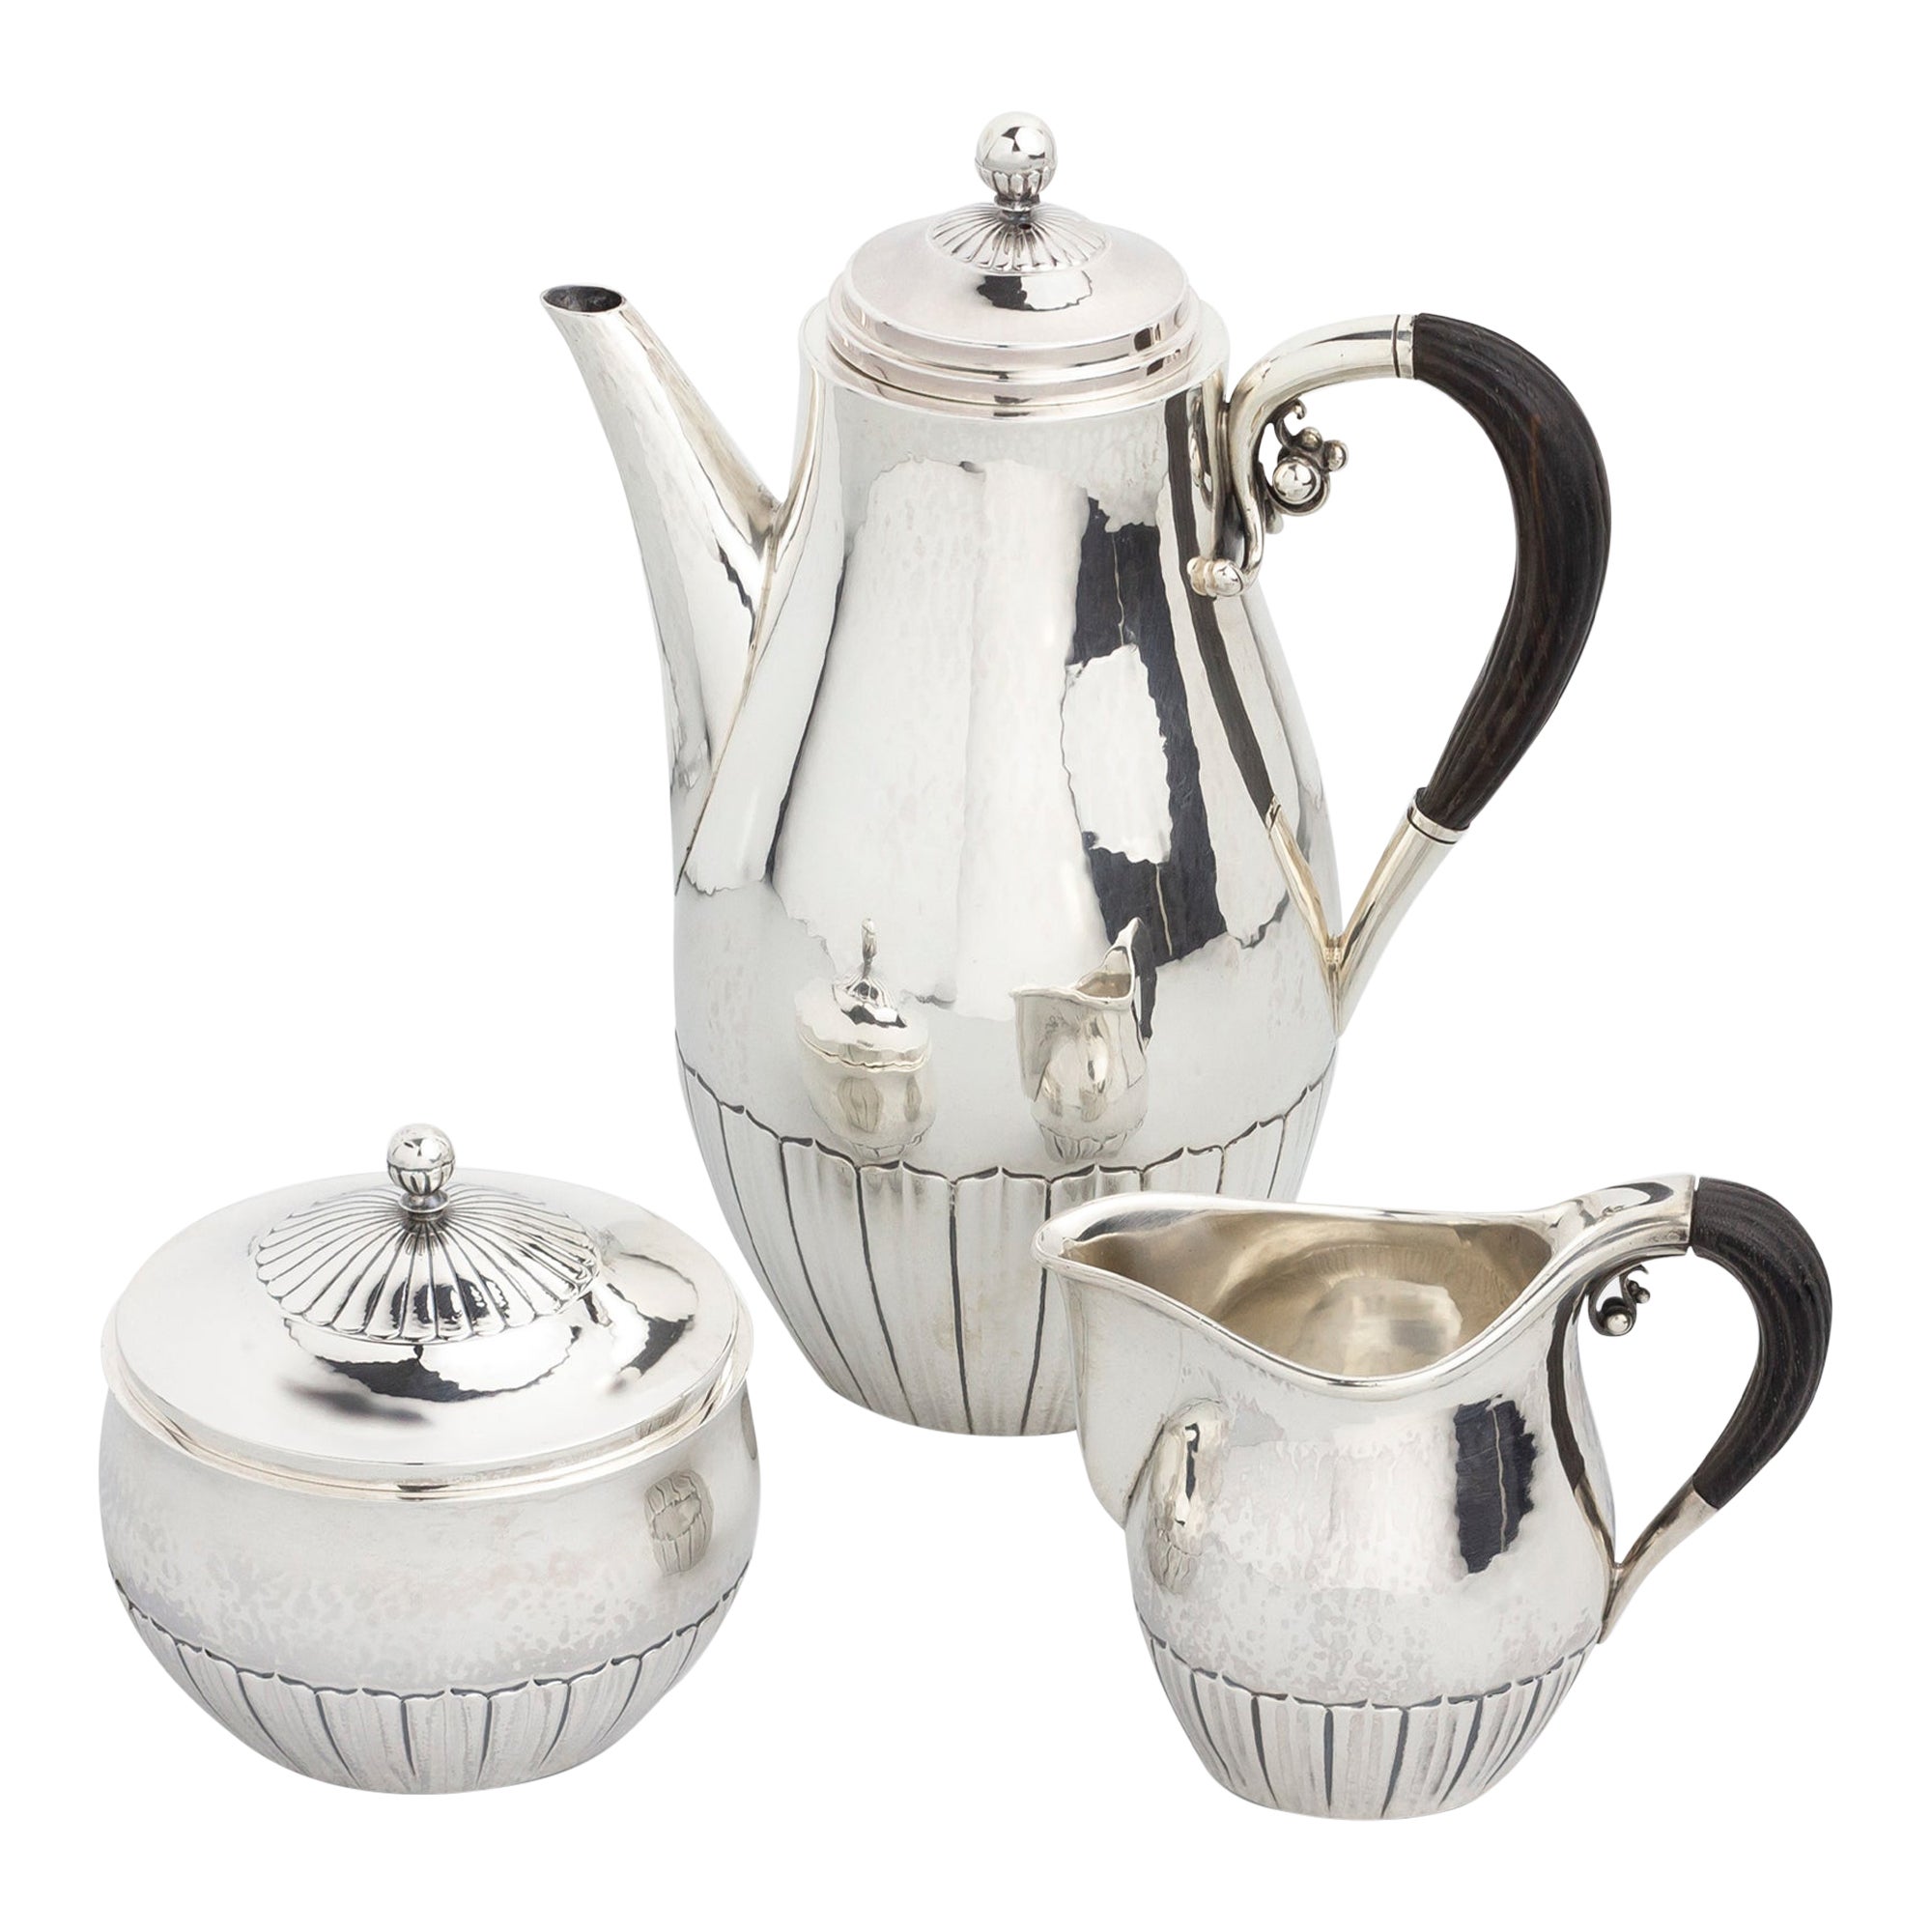 Sterling Silver Mocha or Coffee Set by Georg Jensen in the 'Cosmos' Pattern